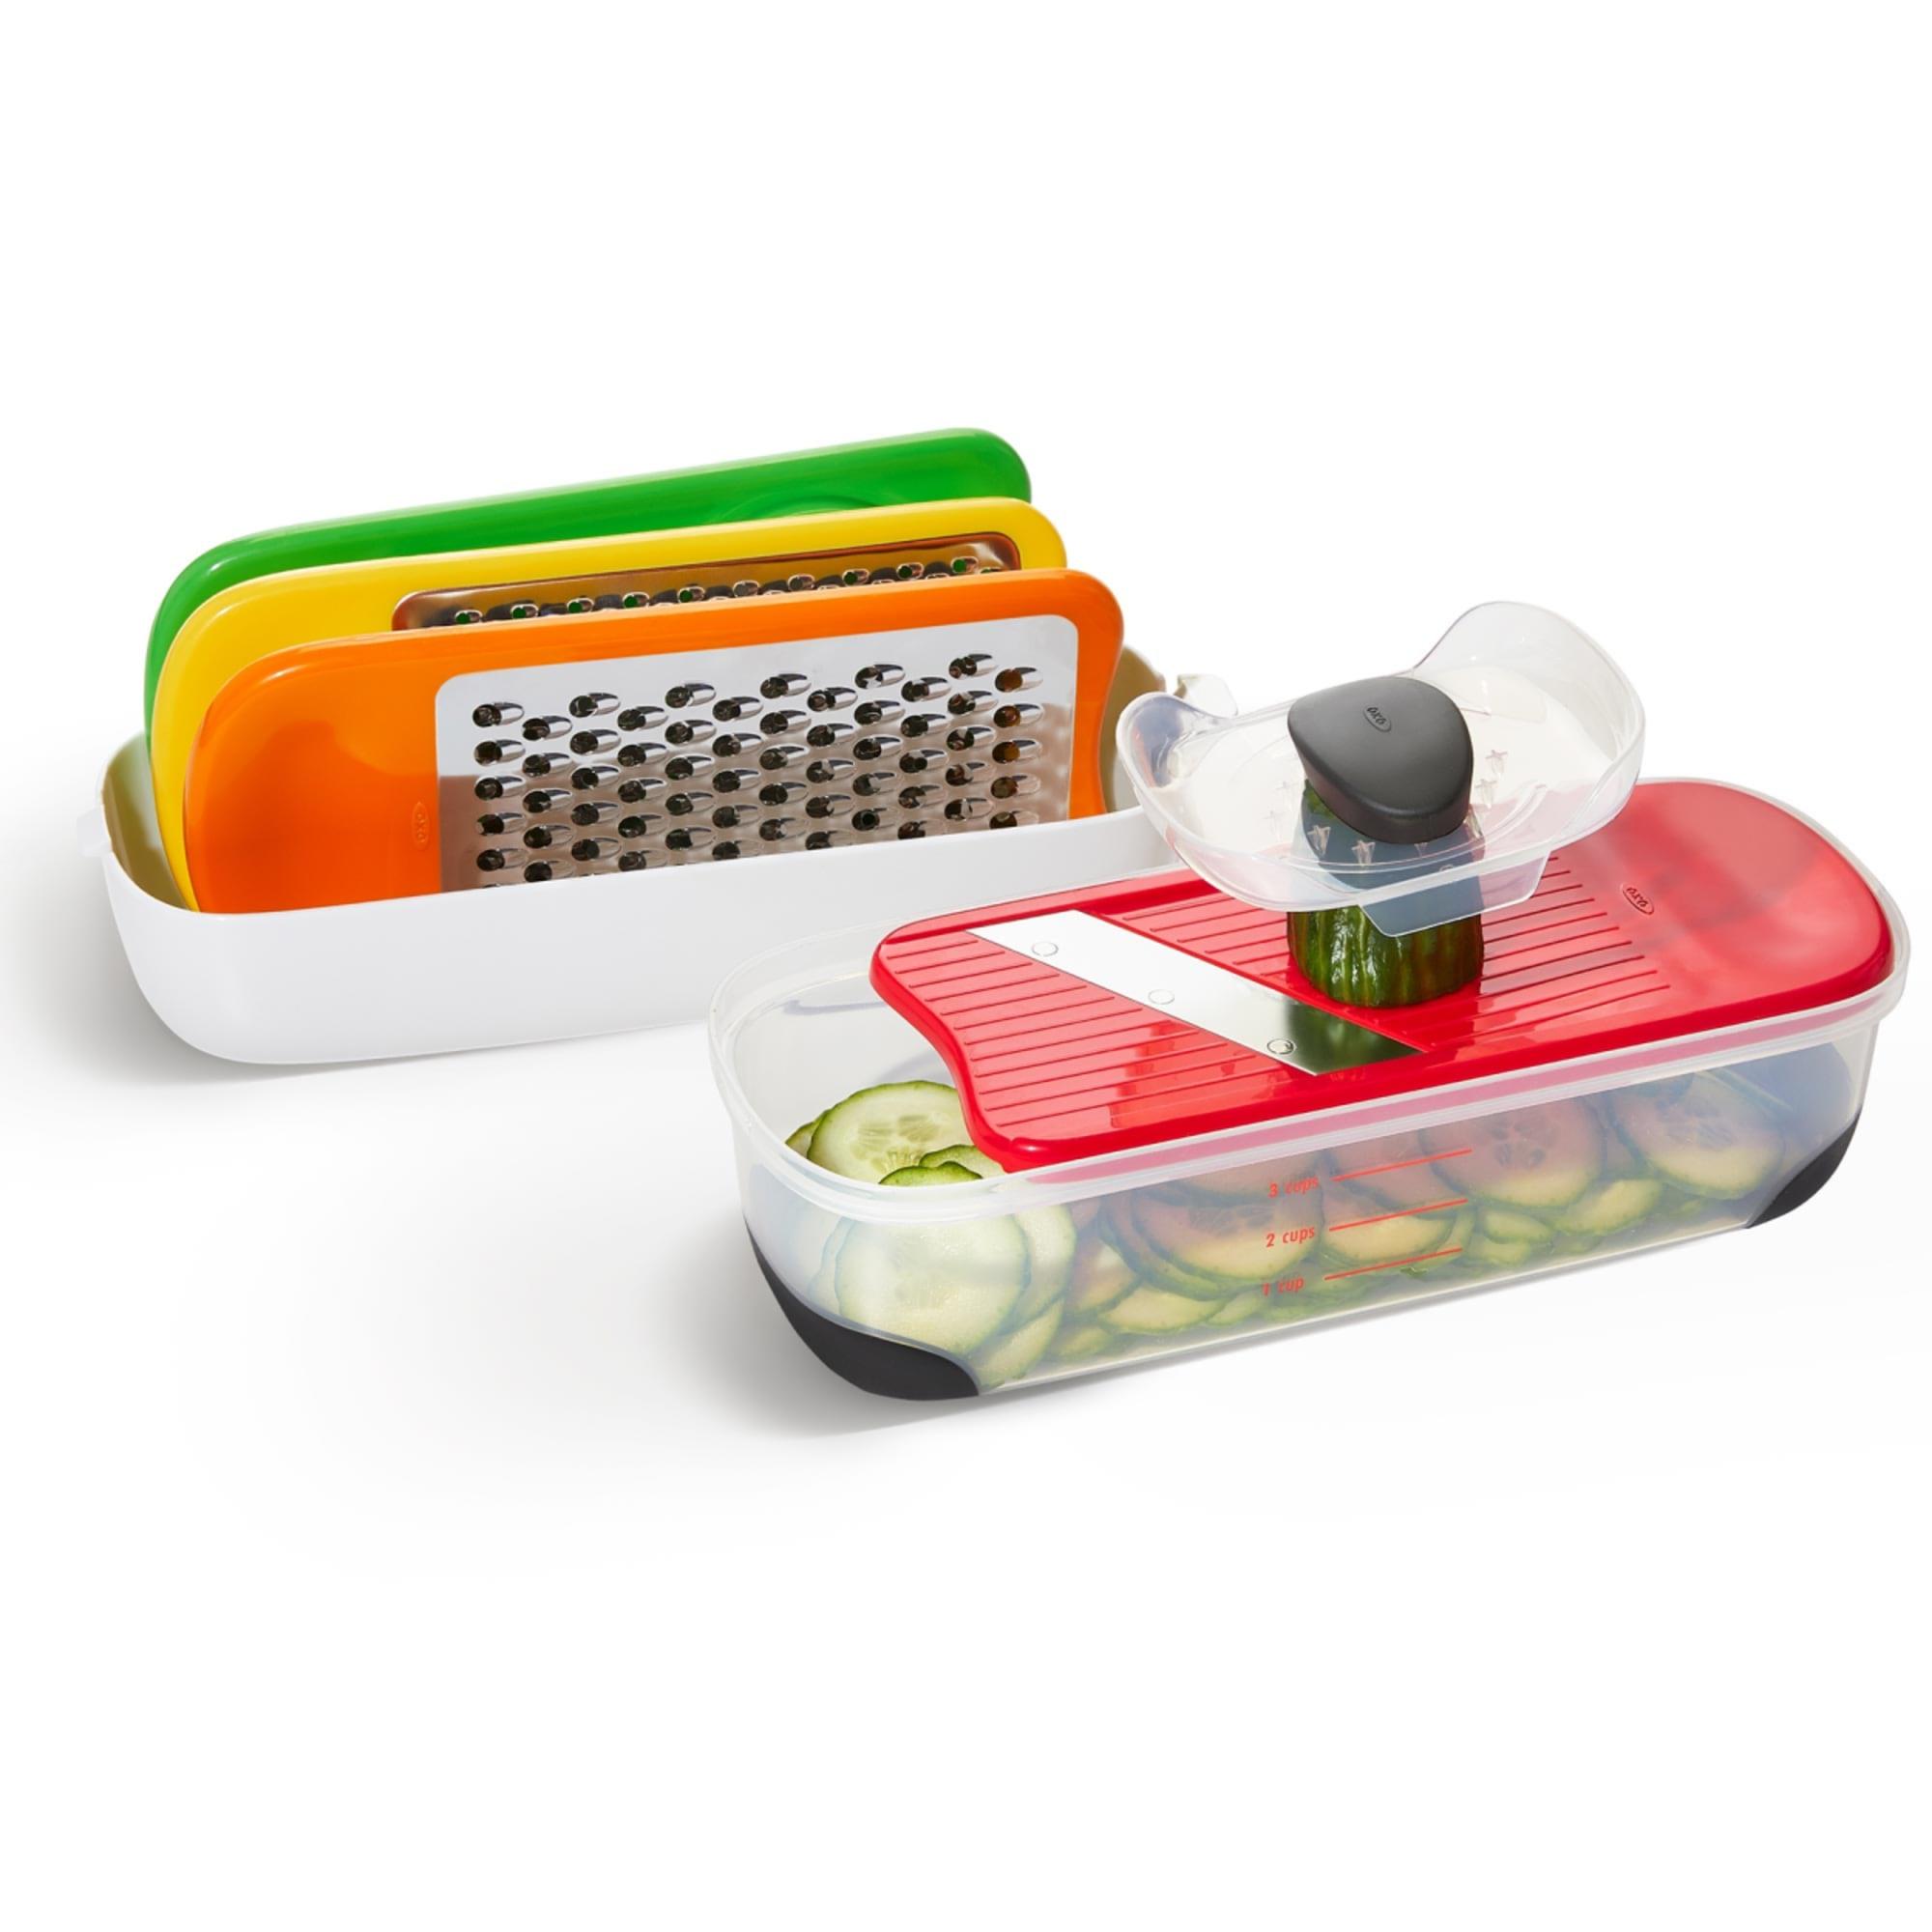 OXO Good Grips Spiralize Grate and Slice Set Image 13